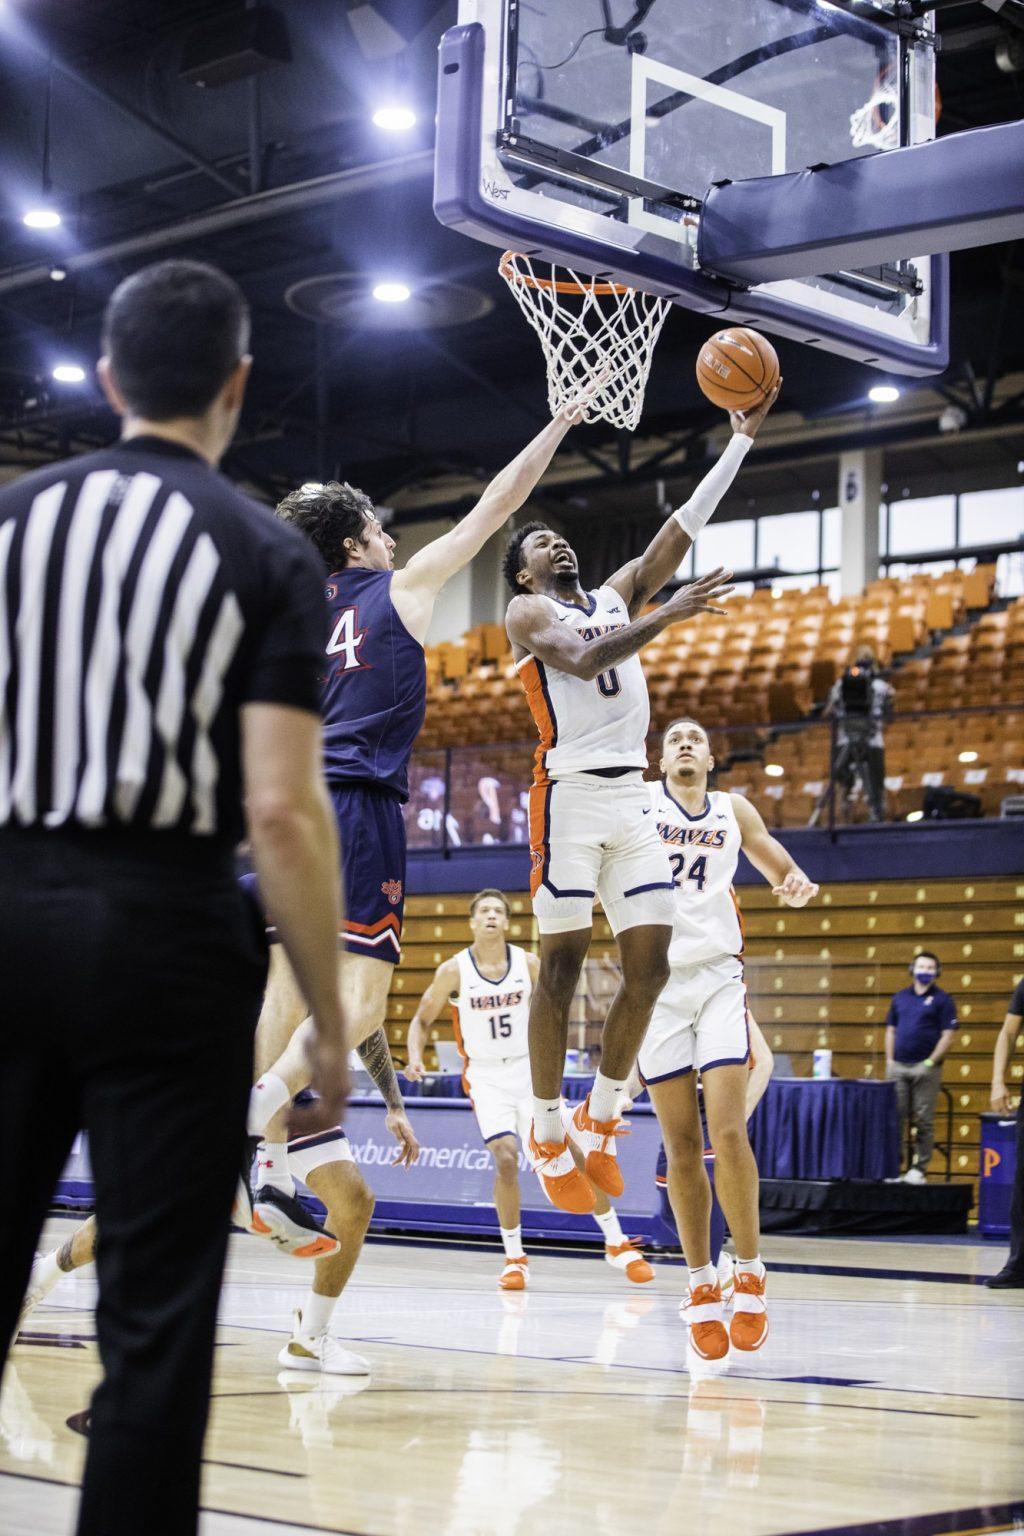 Sophomore guard Sedrick Altman finishes a layup with the left-hand. While he had nine points, his biggest impact was on defense with two steals and two blocks.